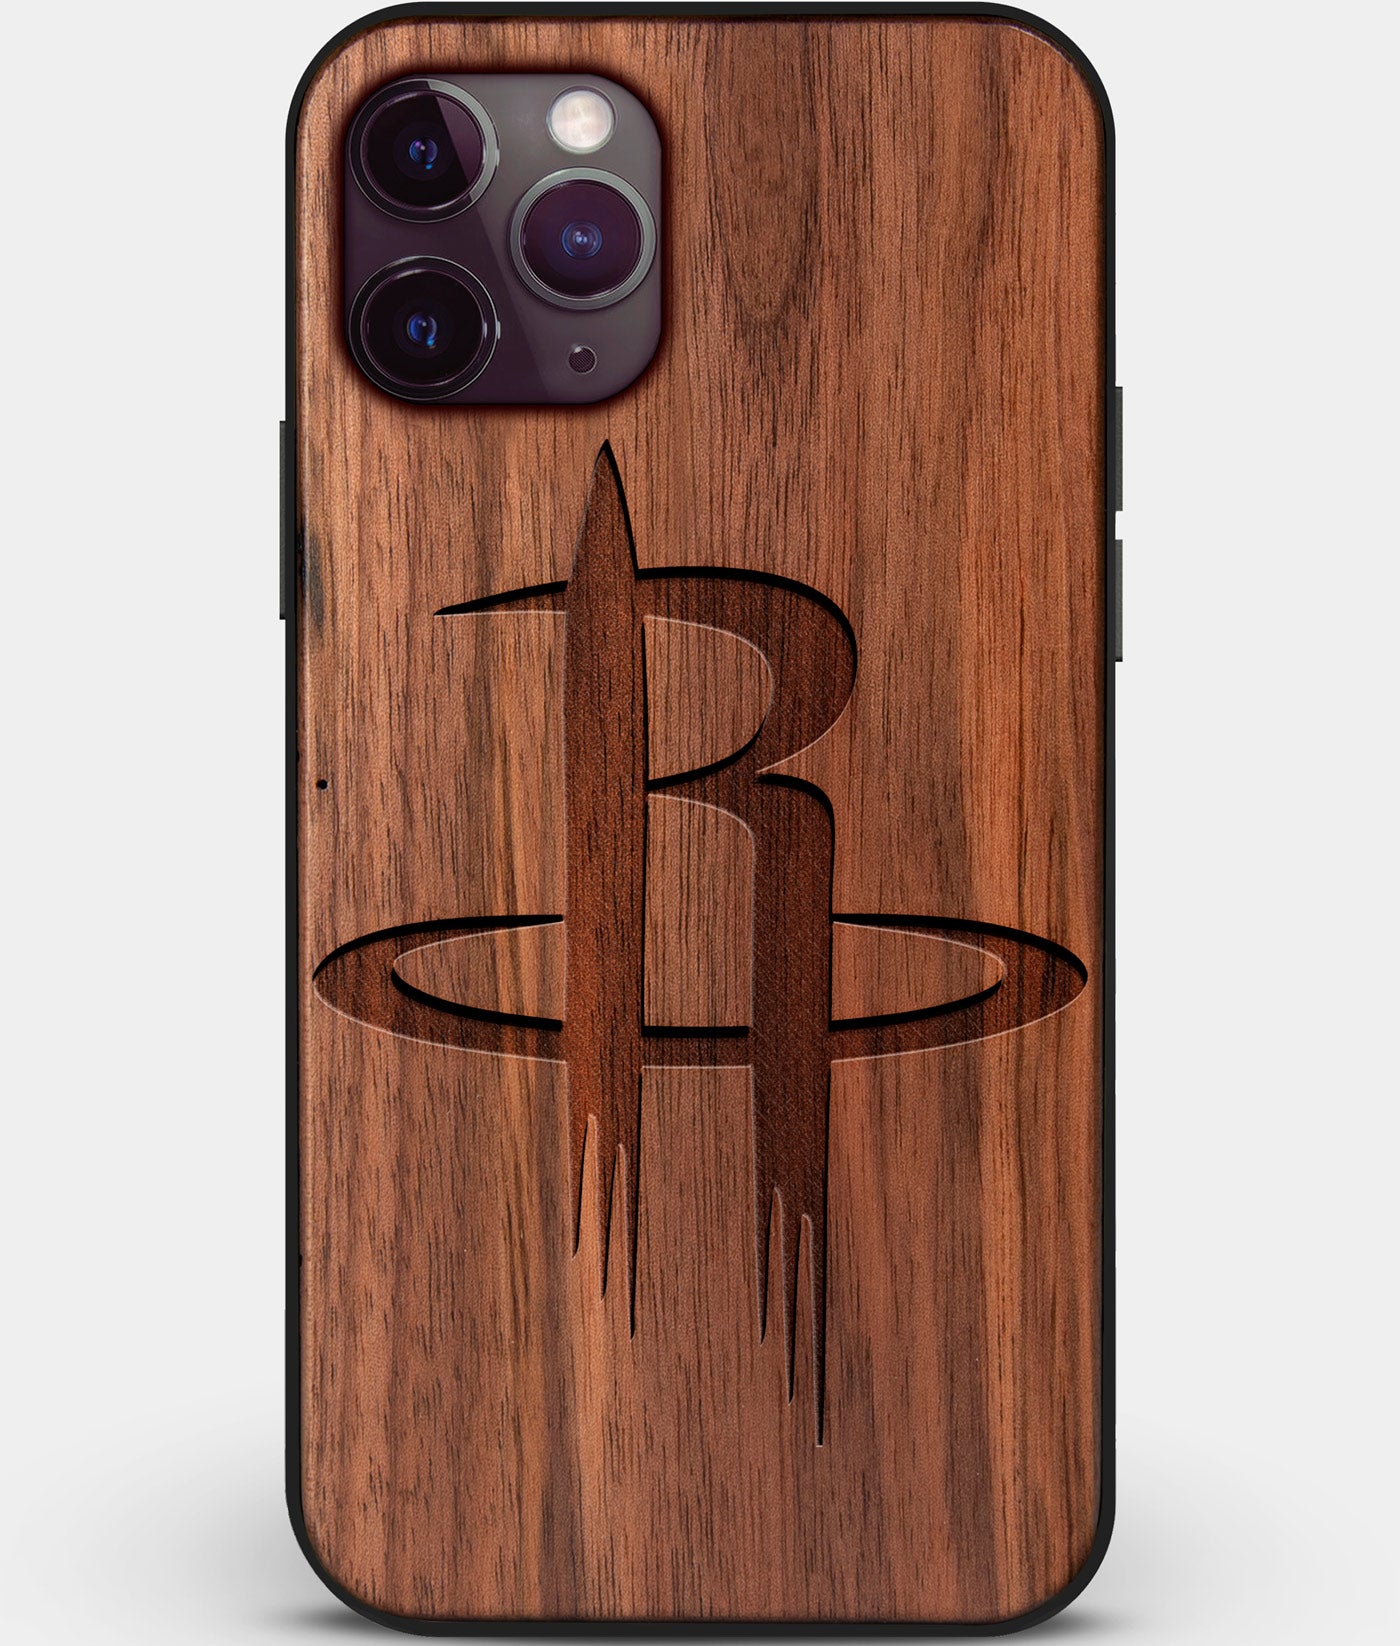 Custom Carved Wood Houston Rockets iPhone 11 Pro Max Case | Personalized Walnut Wood Houston Rockets Cover, Birthday Gift, Gifts For Him, Monogrammed Gift For Fan | by Engraved In Nature